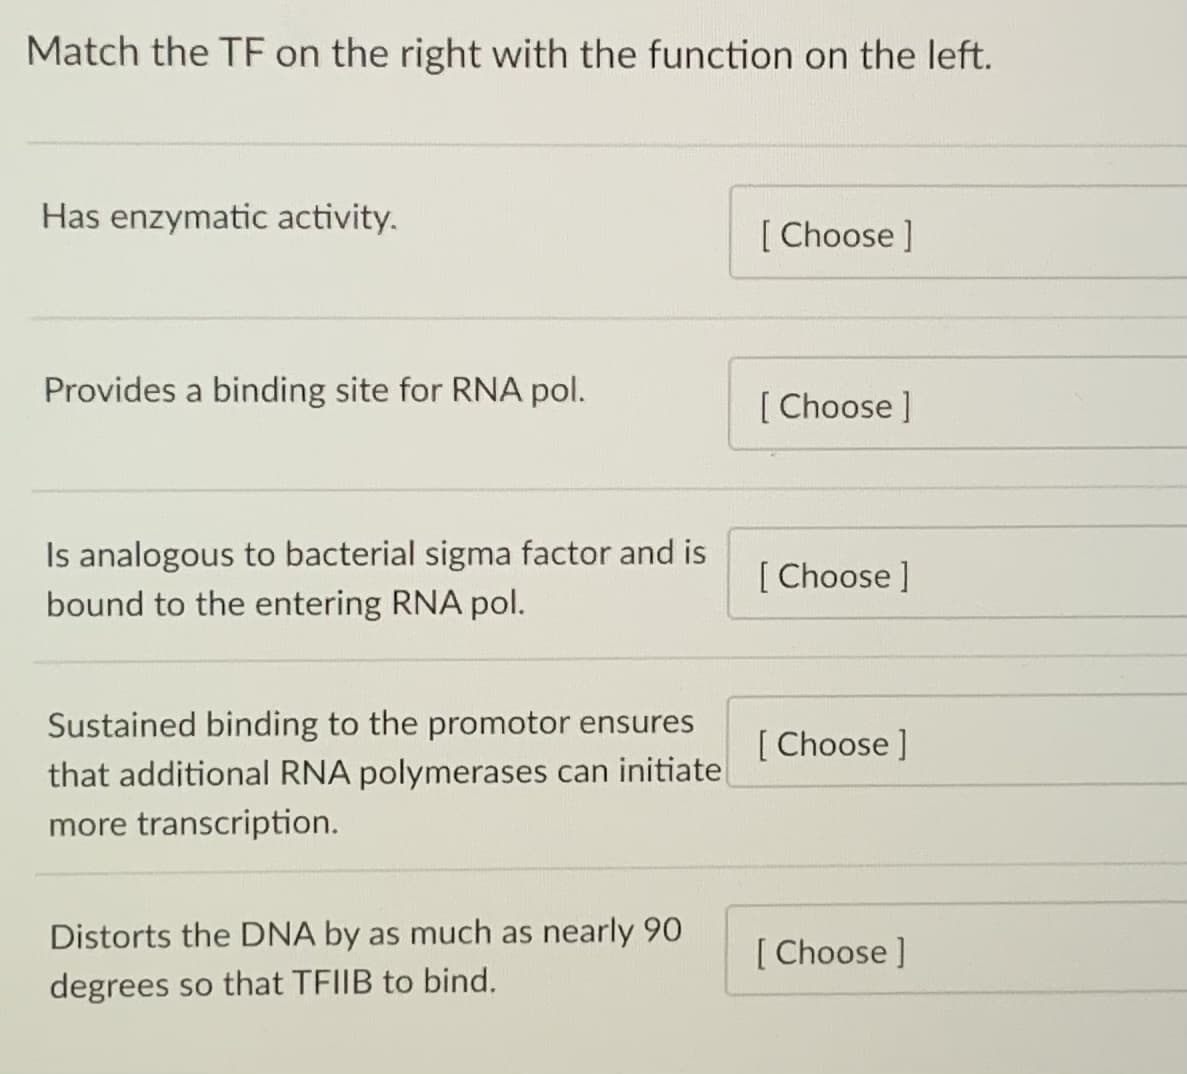 Match the TF on the right with the function on the left.
Has enzymatic activity.
[ Choose ]
Provides a binding site for RNA pol.
[ Choose ]
Is analogous to bacterial sigma factor and is
bound to the entering RNA pol.
[ Choose ]
Sustained binding to the promotor ensures
that additional RNA polymerases can initiatel
[ Choose ]
more transcription.
Distorts the DNA by as much as nearly 90
[ Choose ]
degrees so that TFIIB to bind.
